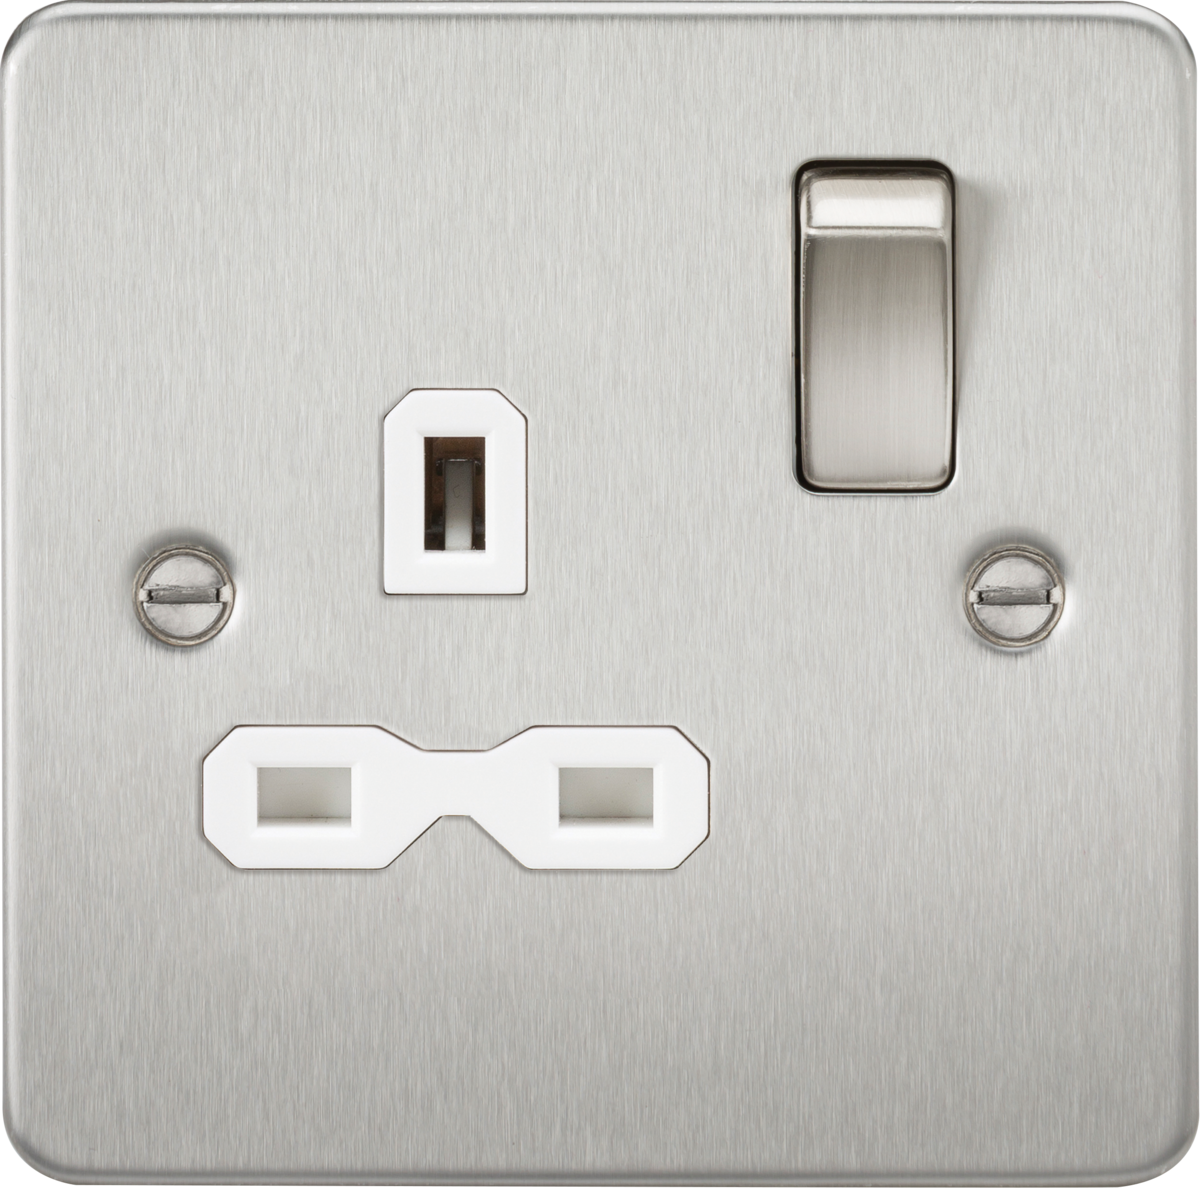 Flat plate 13A 1G DP switched socket - brushed chrome with white insert